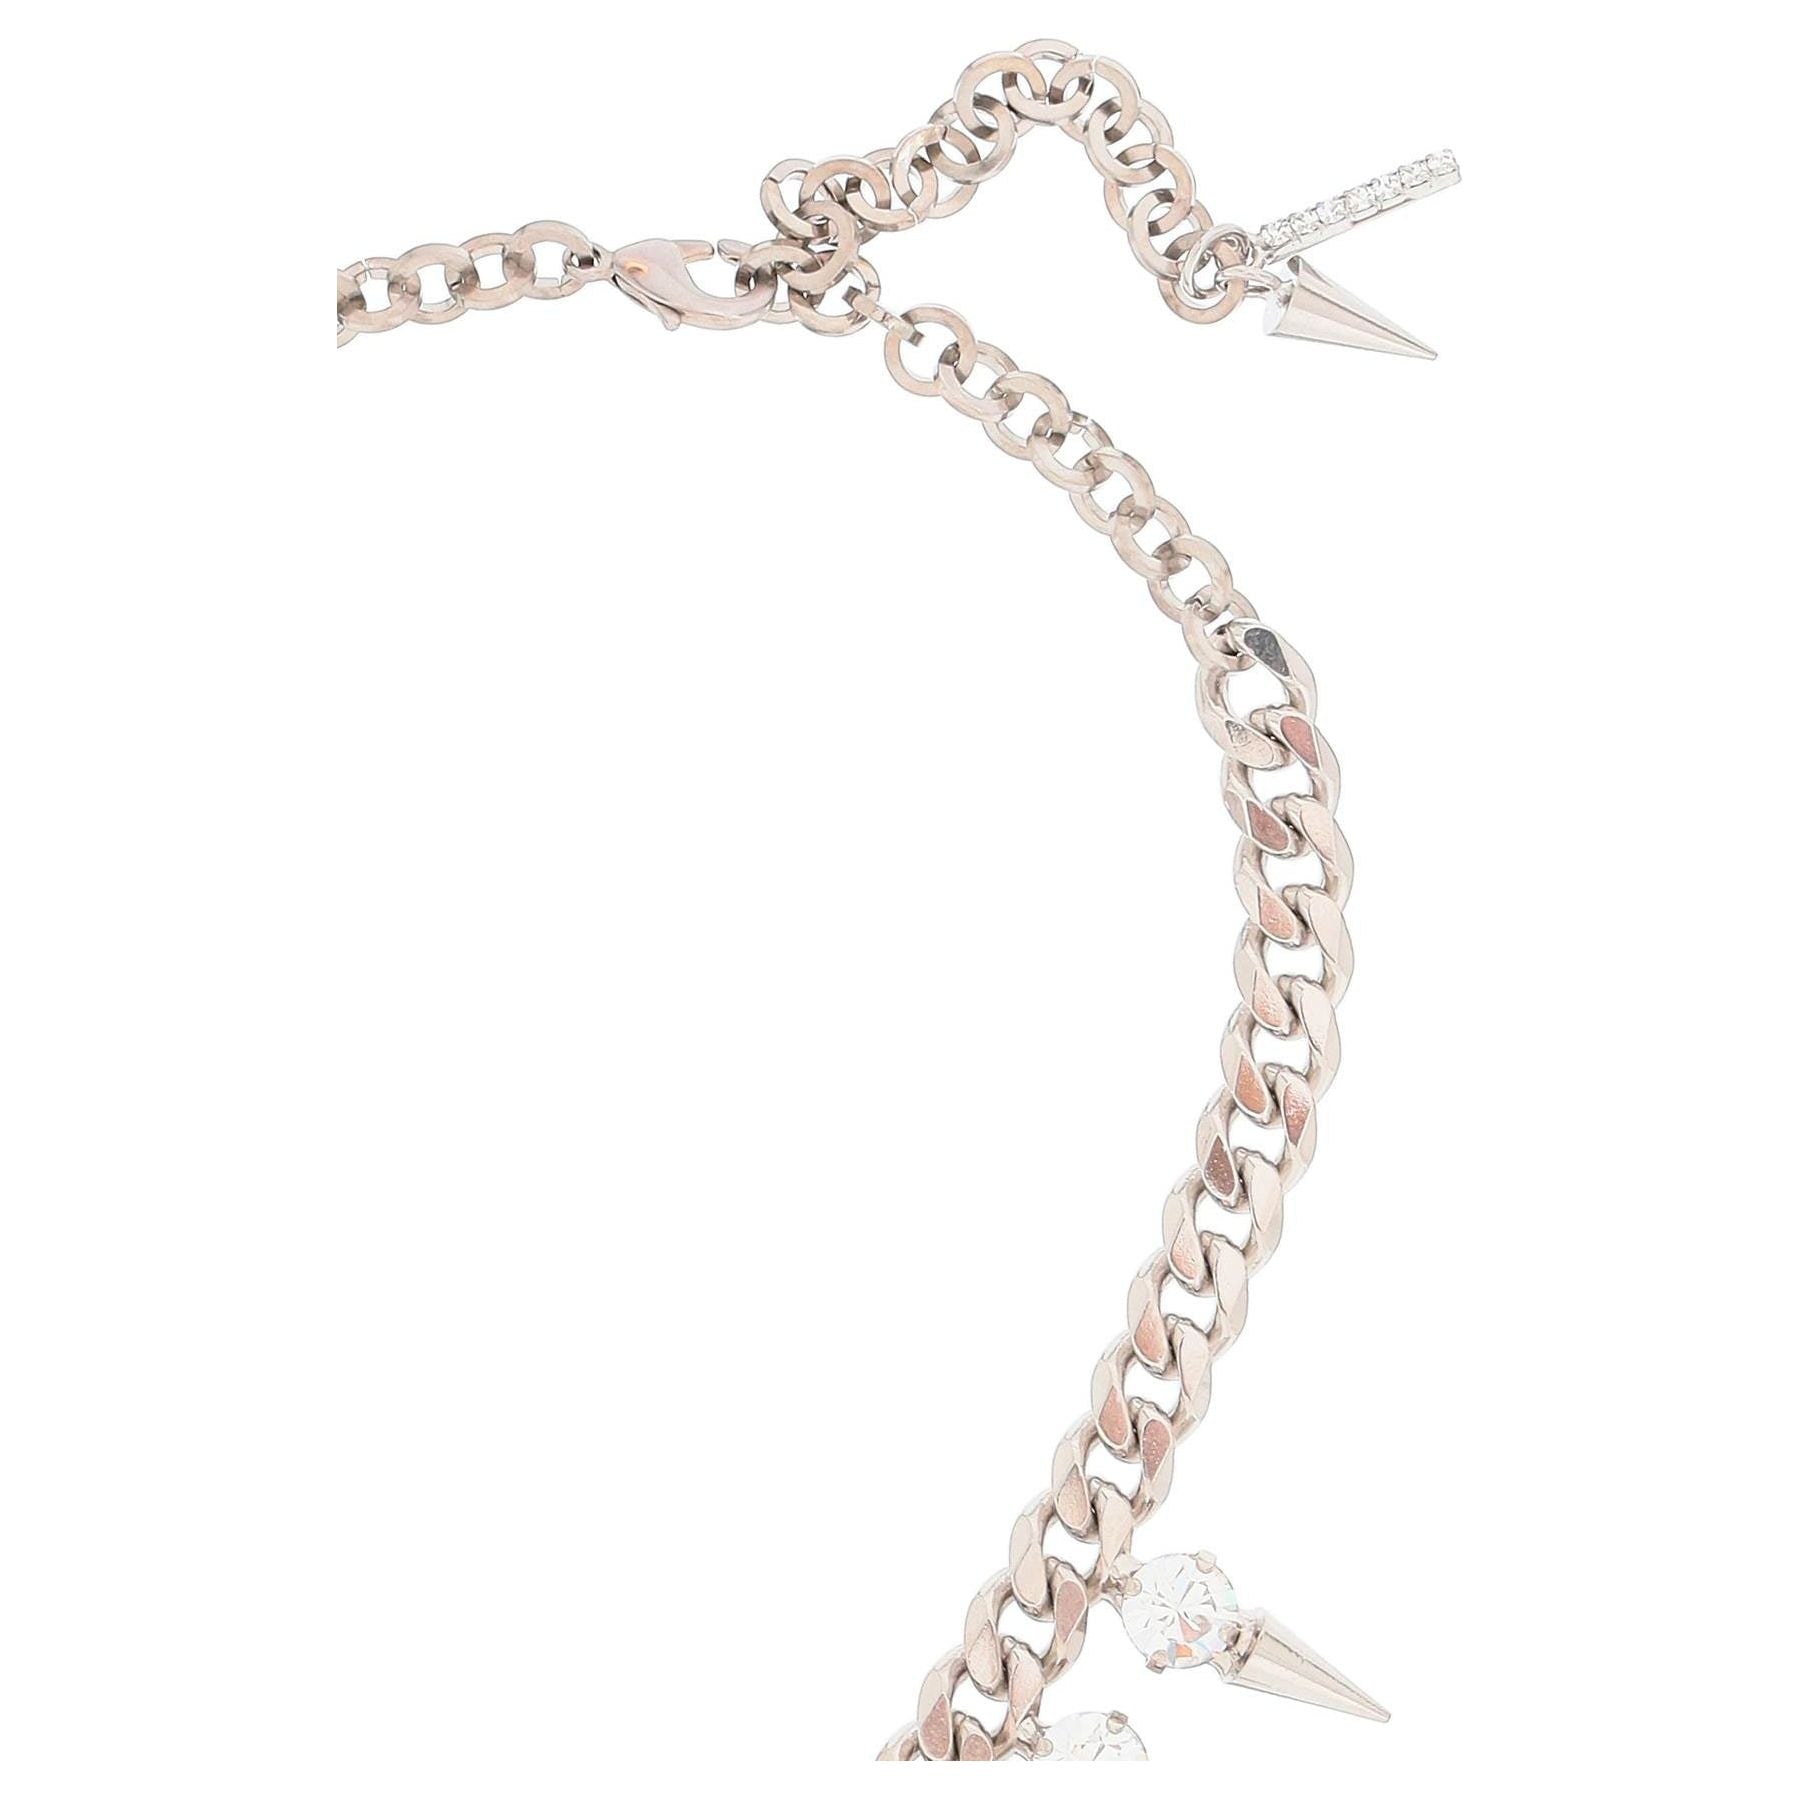 Silver-Plated Brass Choker with Crystals and Spikes